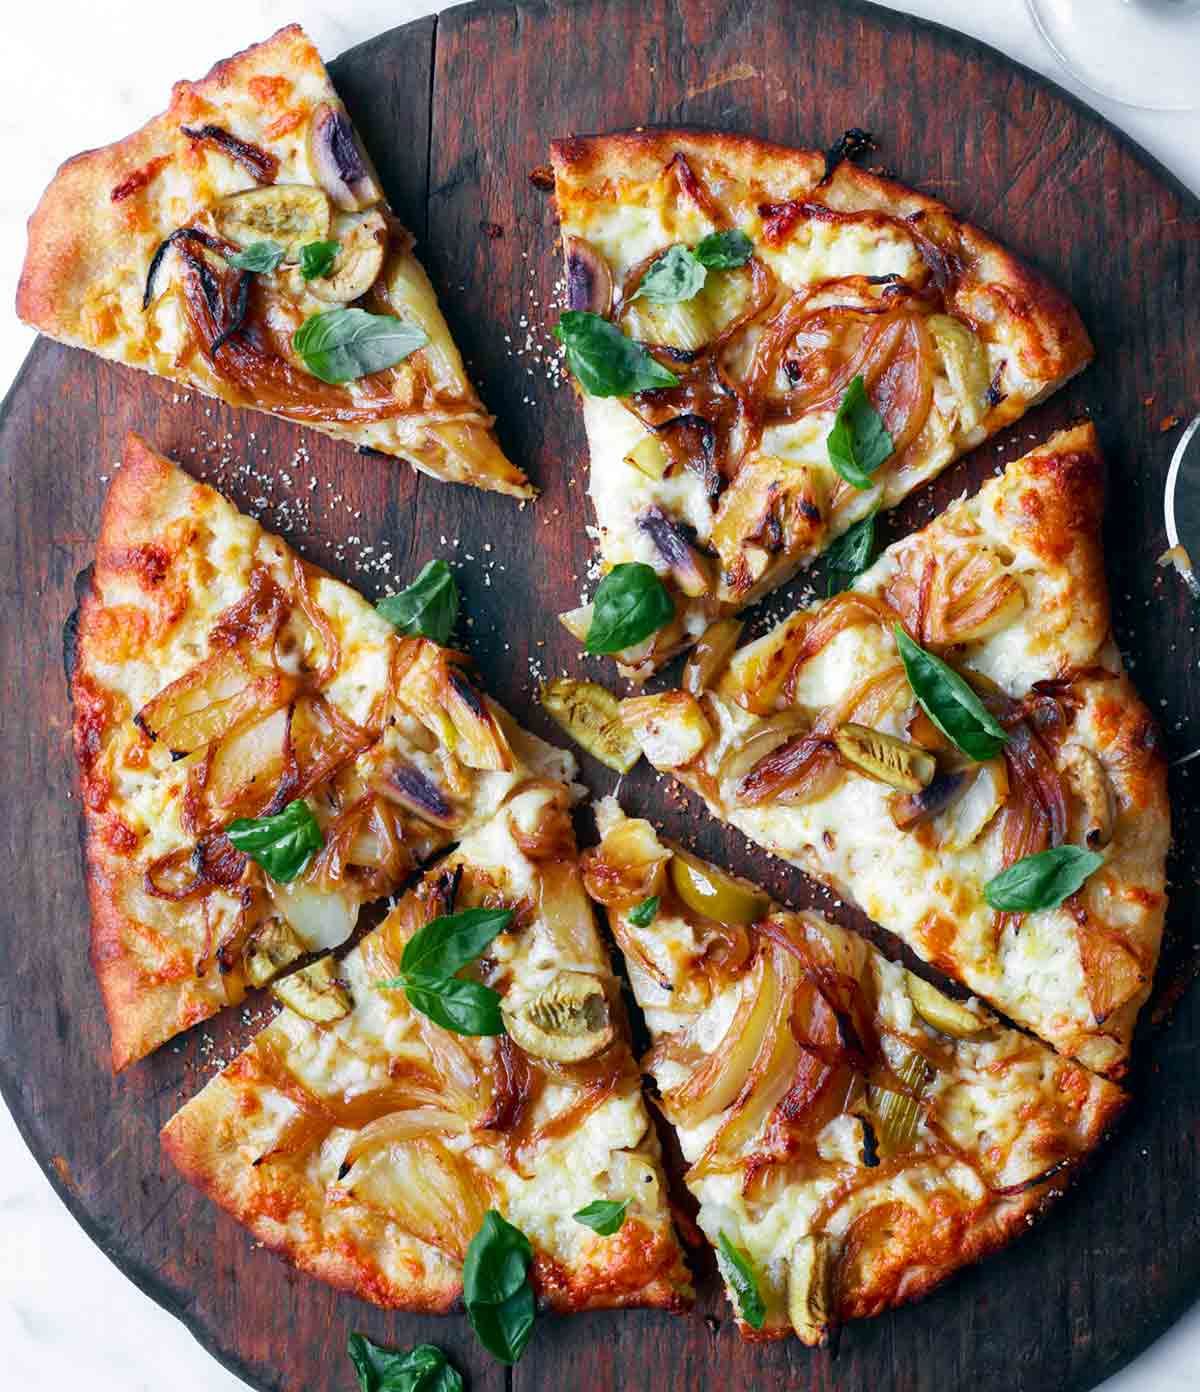 A fennel and sweet onion pizza with green olives on a wooden cutting board